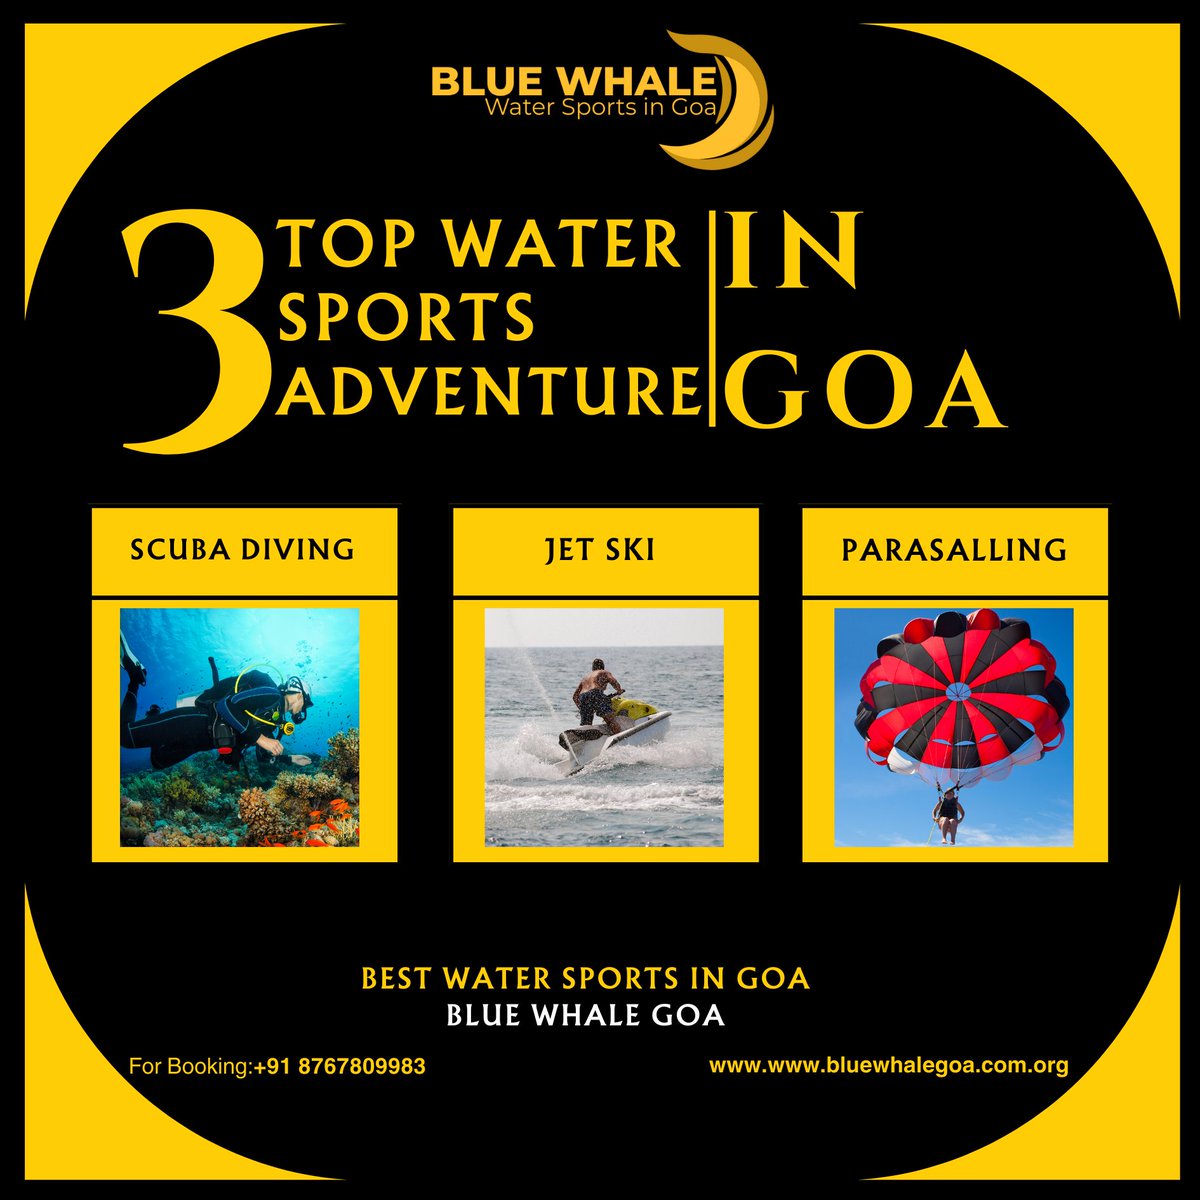 Dive deep with Blue Whale Goa! 🌊 Experience the thrill of Scuba Diving, Jet Skiing, and Parasailing along Goa's stunning coast. Book your adventure today! 💙 #BlueWhaleGoa #WaterSports #GoaAdventures